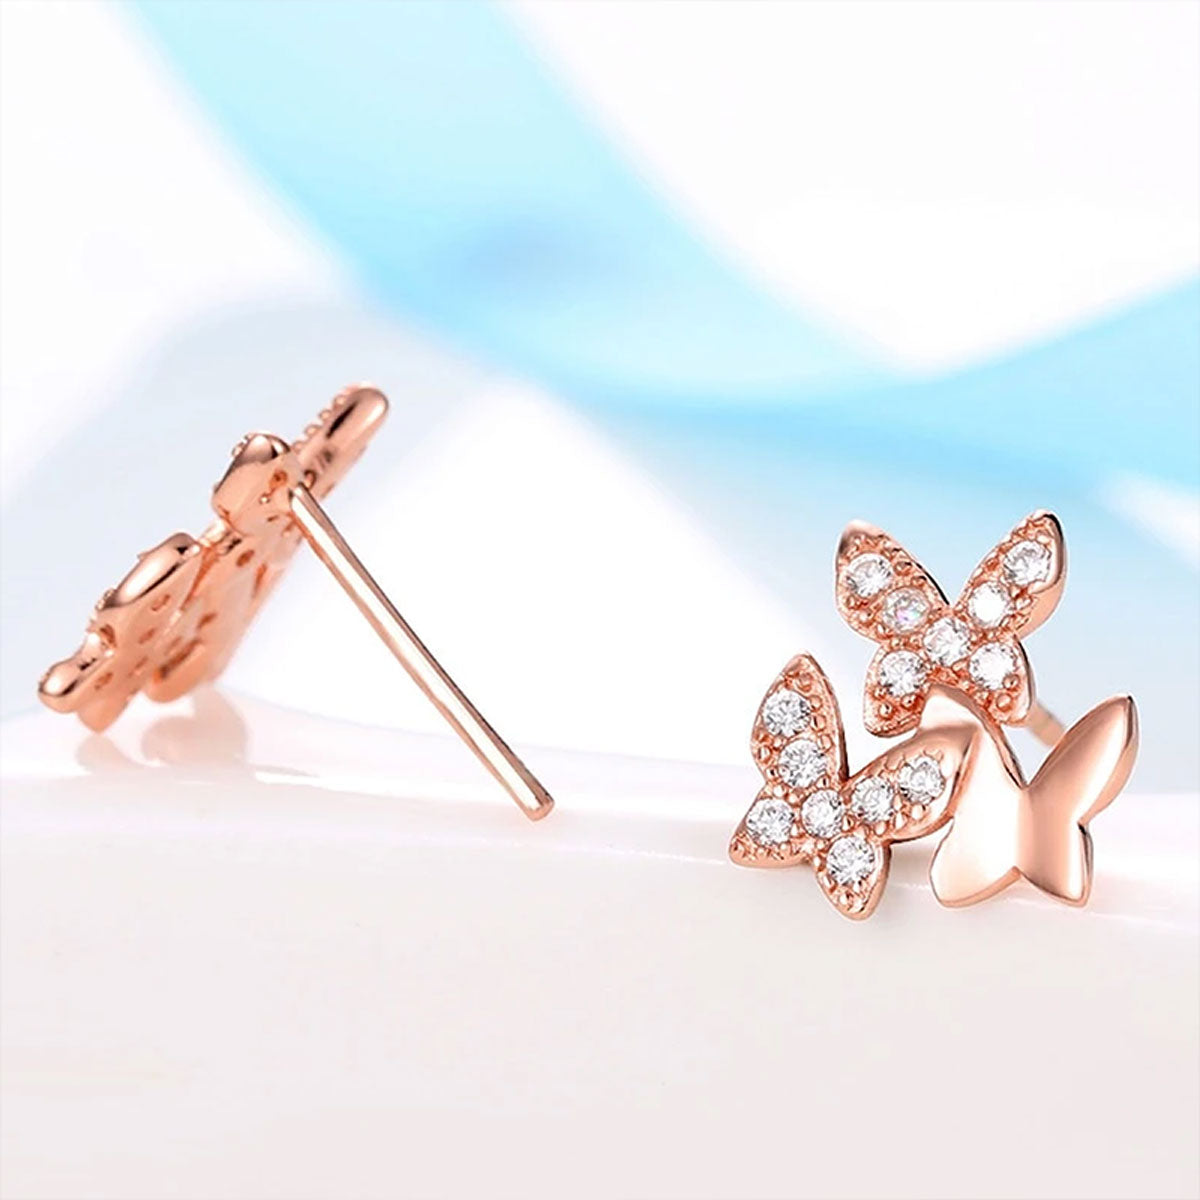 Free Spirit Rose Gold Butterfly Super Bundle with Free Butterfly Charm Bracelets